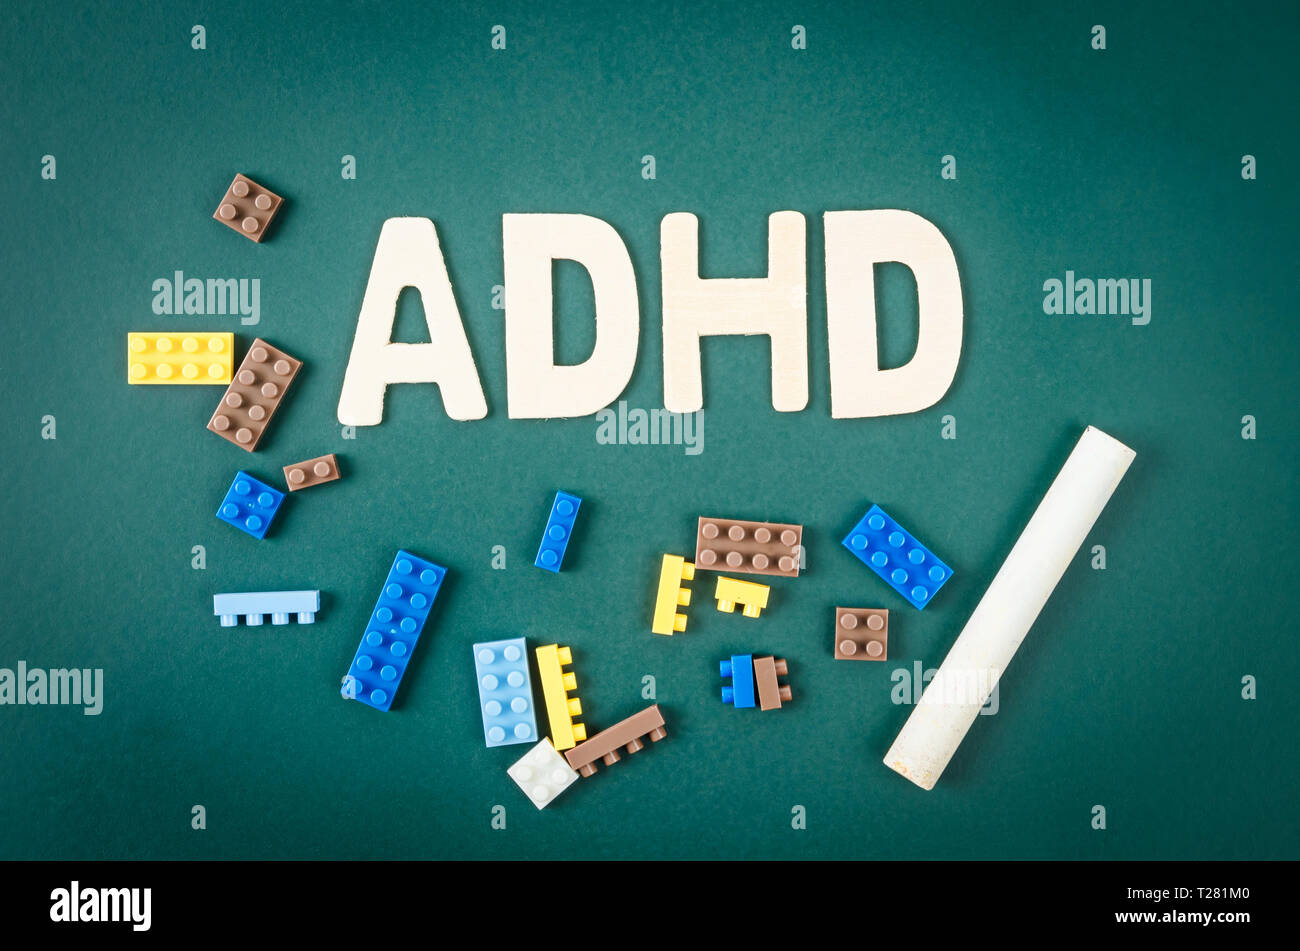 ADHD – attention deficit hyperactivity disorder concept on greenboard. Stock Photo